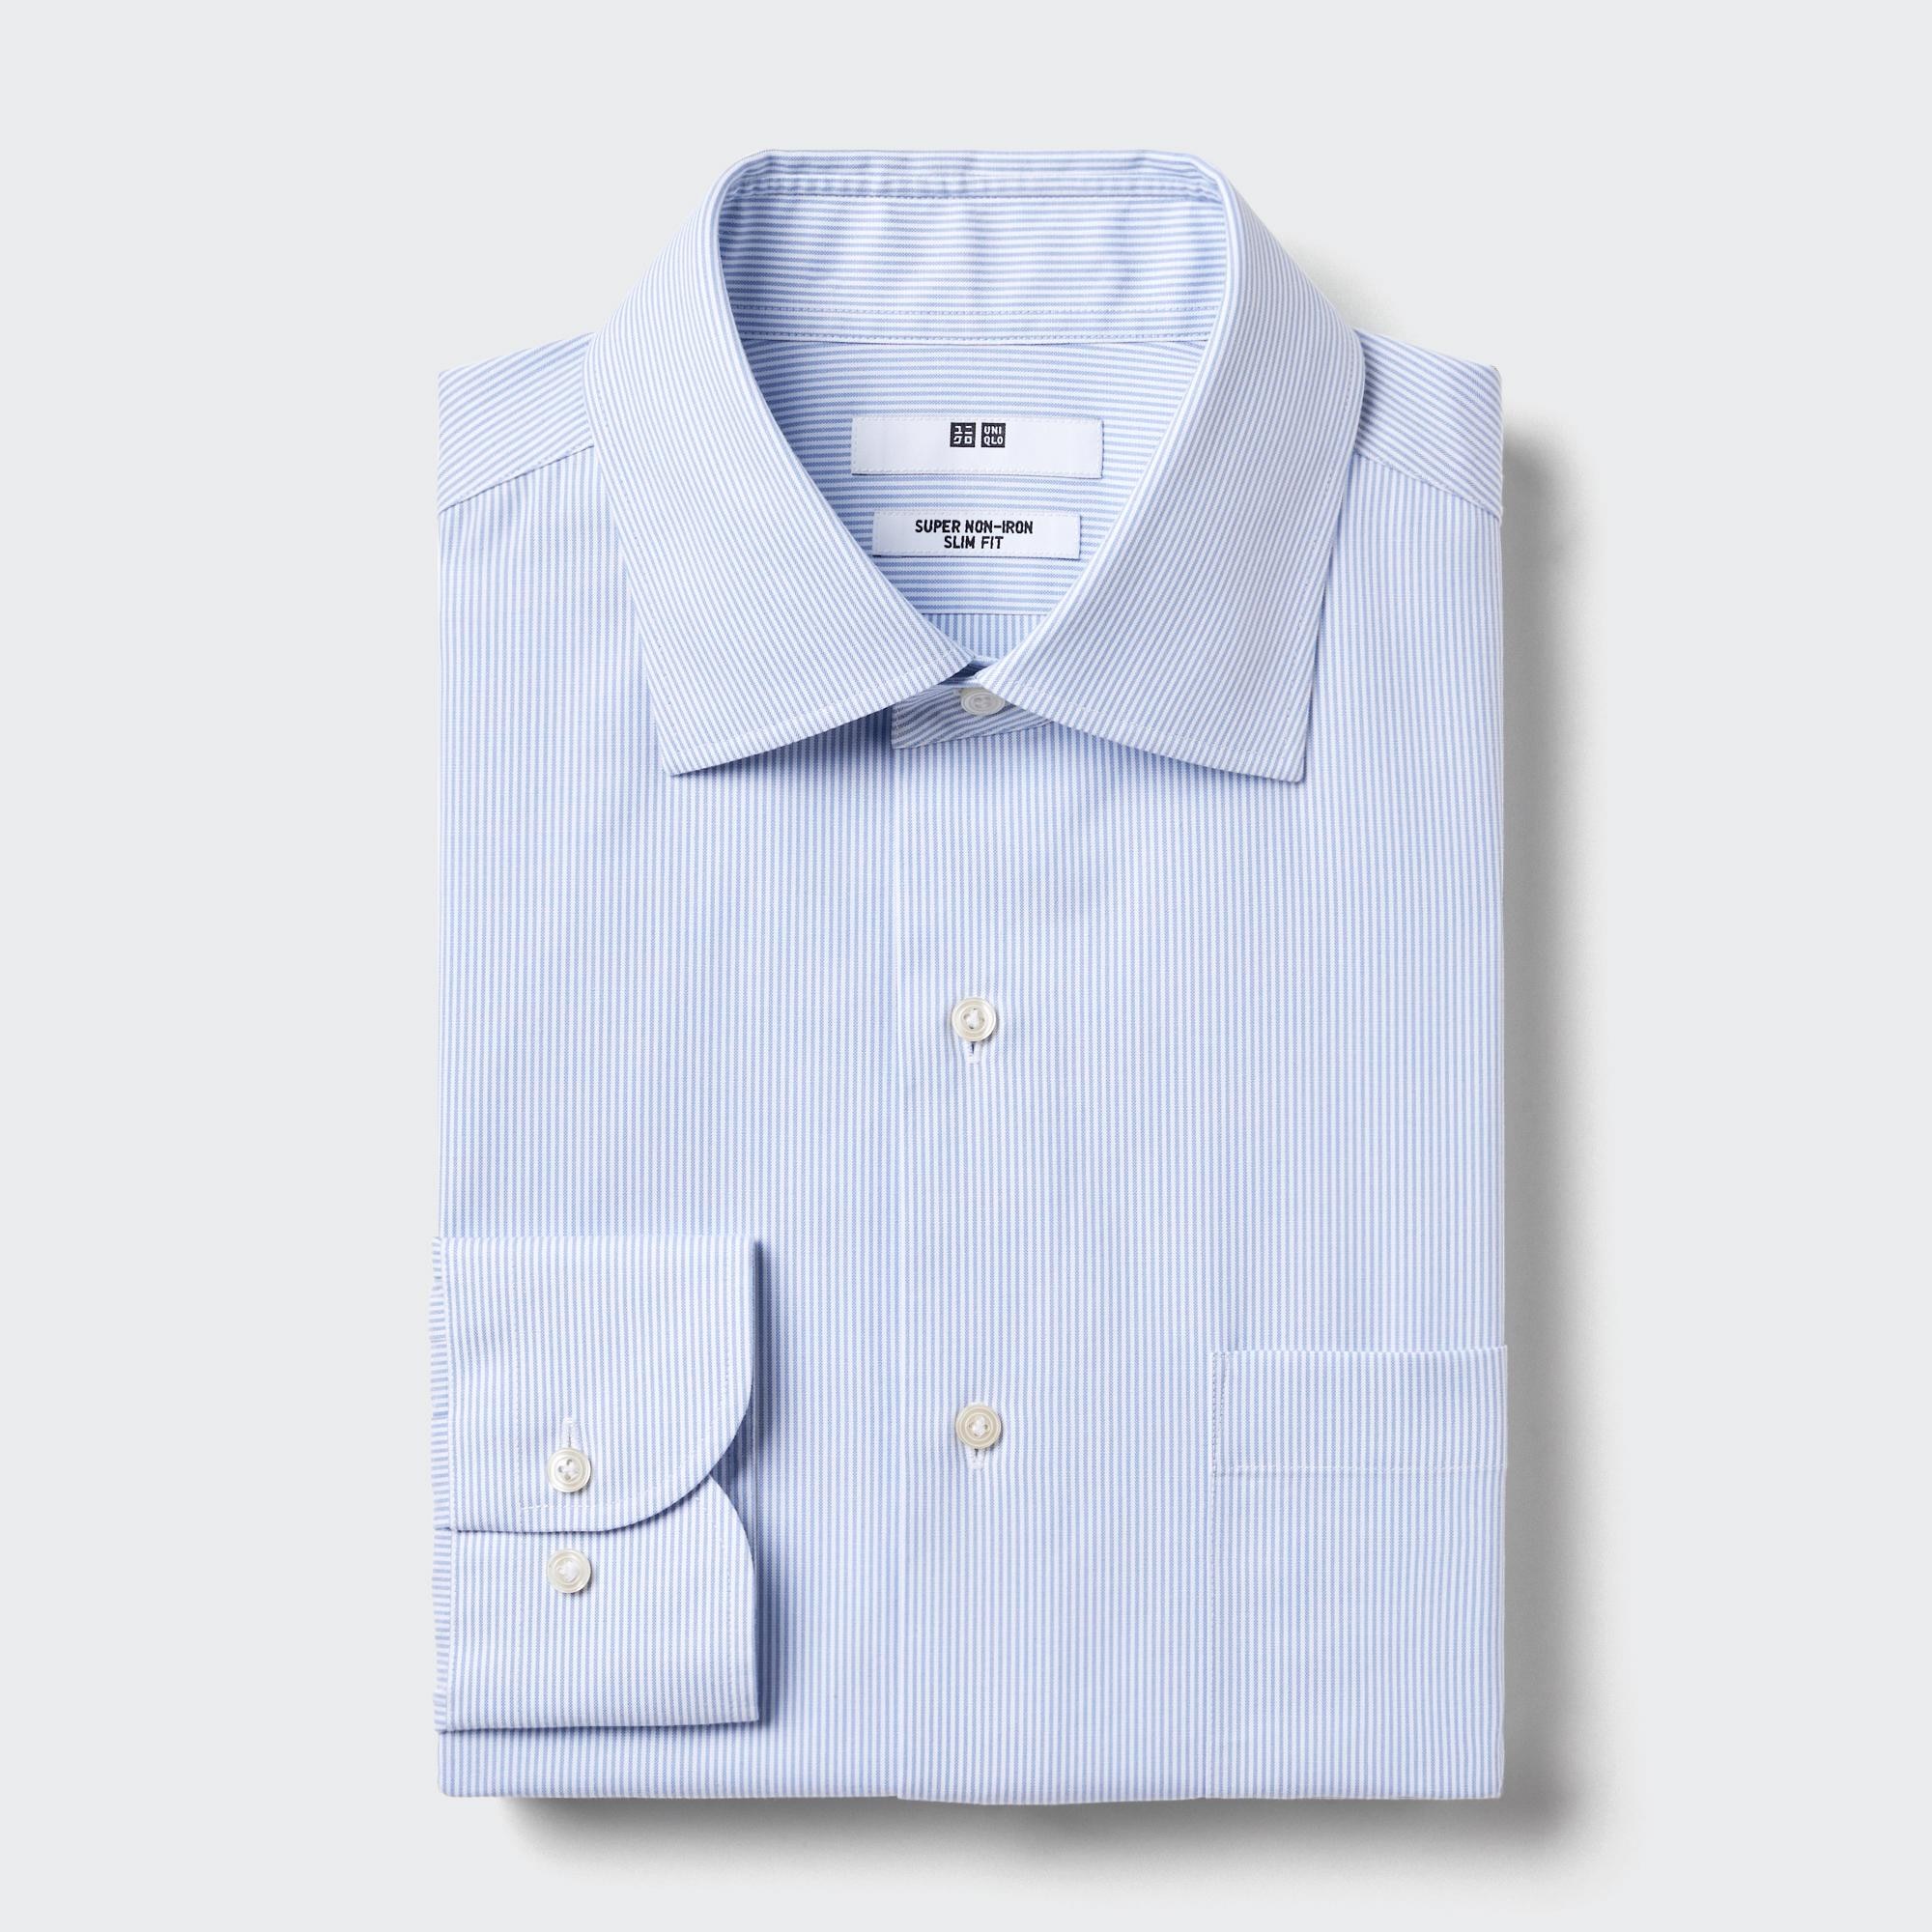 The New Custom Dress Shirts From Uniqlo A Detailed Review  The Peak  Lapel